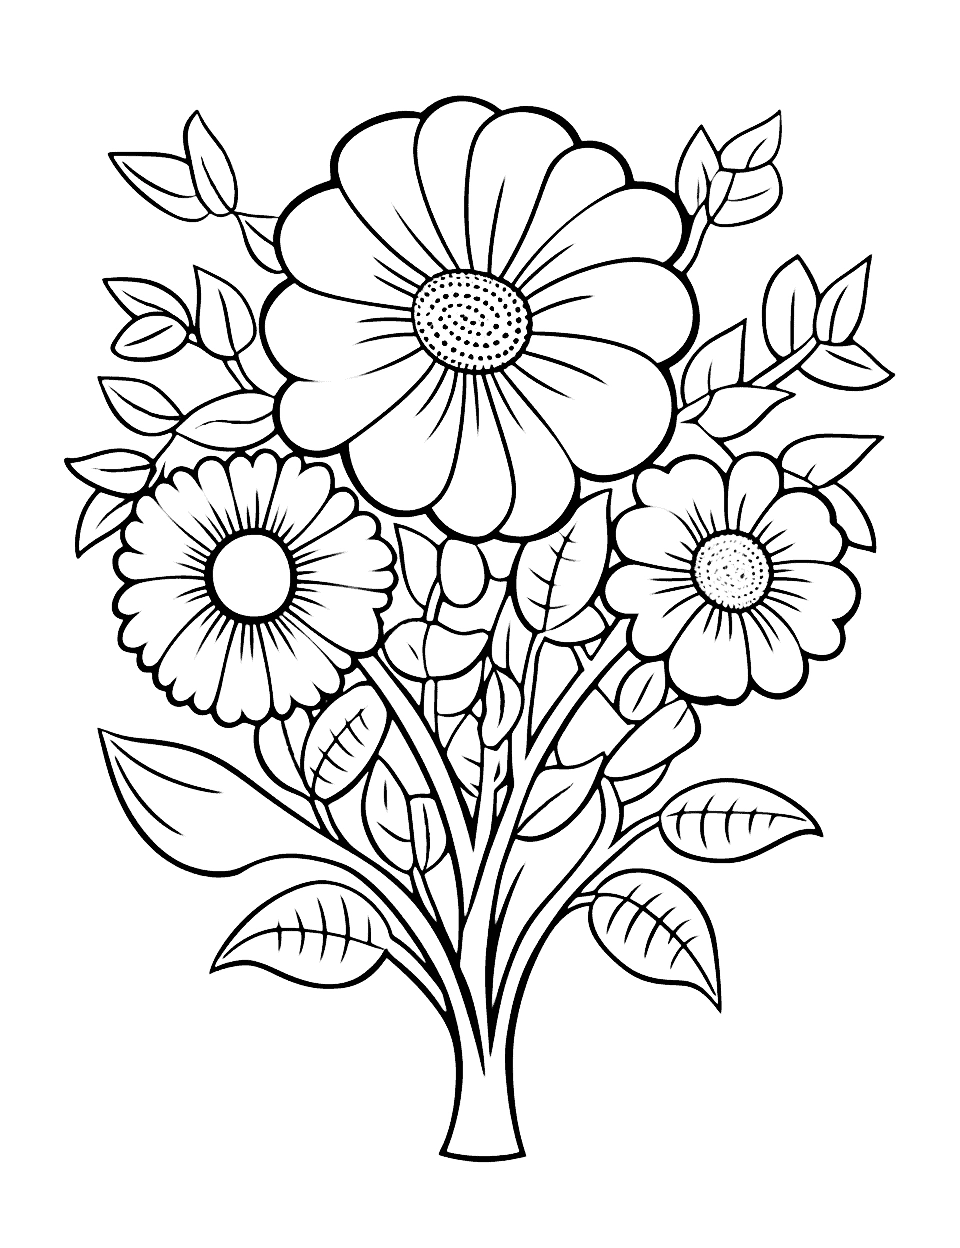 75 Flower Coloring Pages: Free Printable Sheets inside Free Printable Flowers